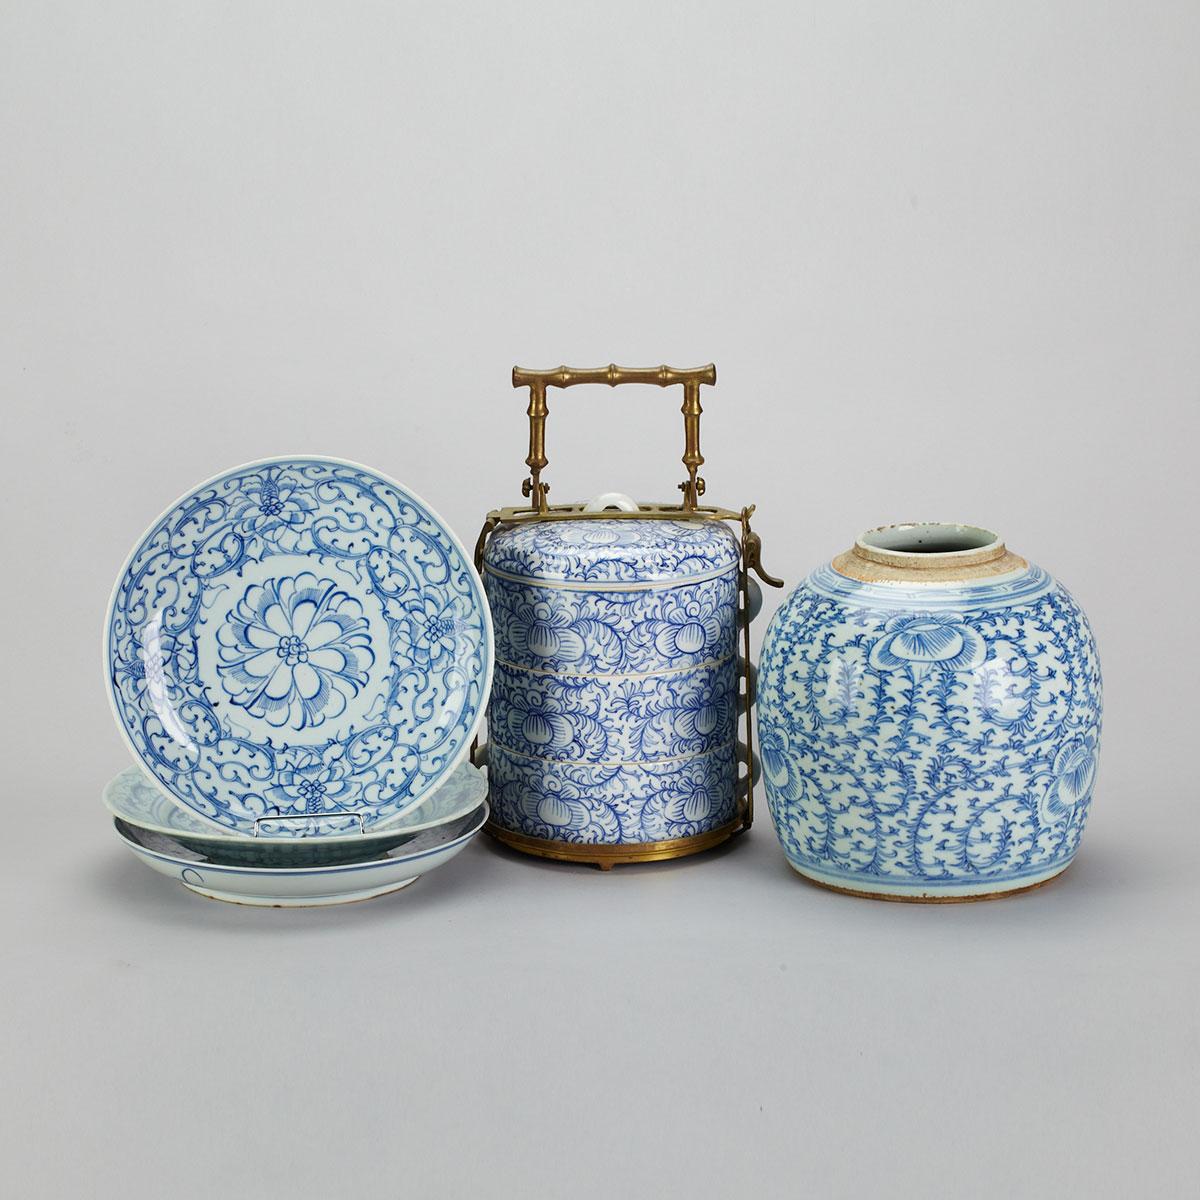 Group of Blue and White ‘Floral Design’ Porcelain Wares, 19th/20th Century